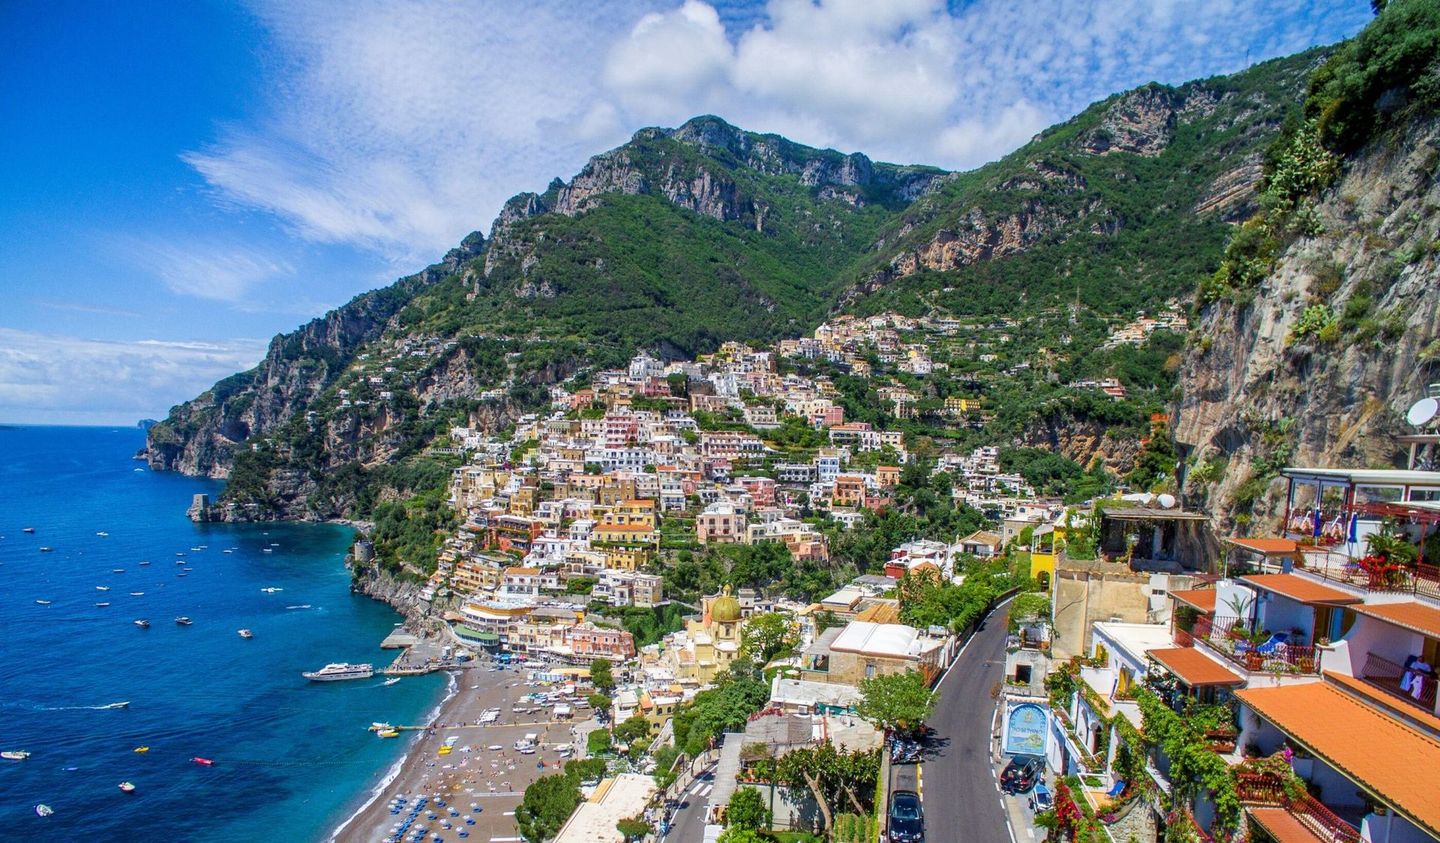 Positano's cliffside landscape with colorful buildings, clear blue sea, and beach ideal for tour experiences.